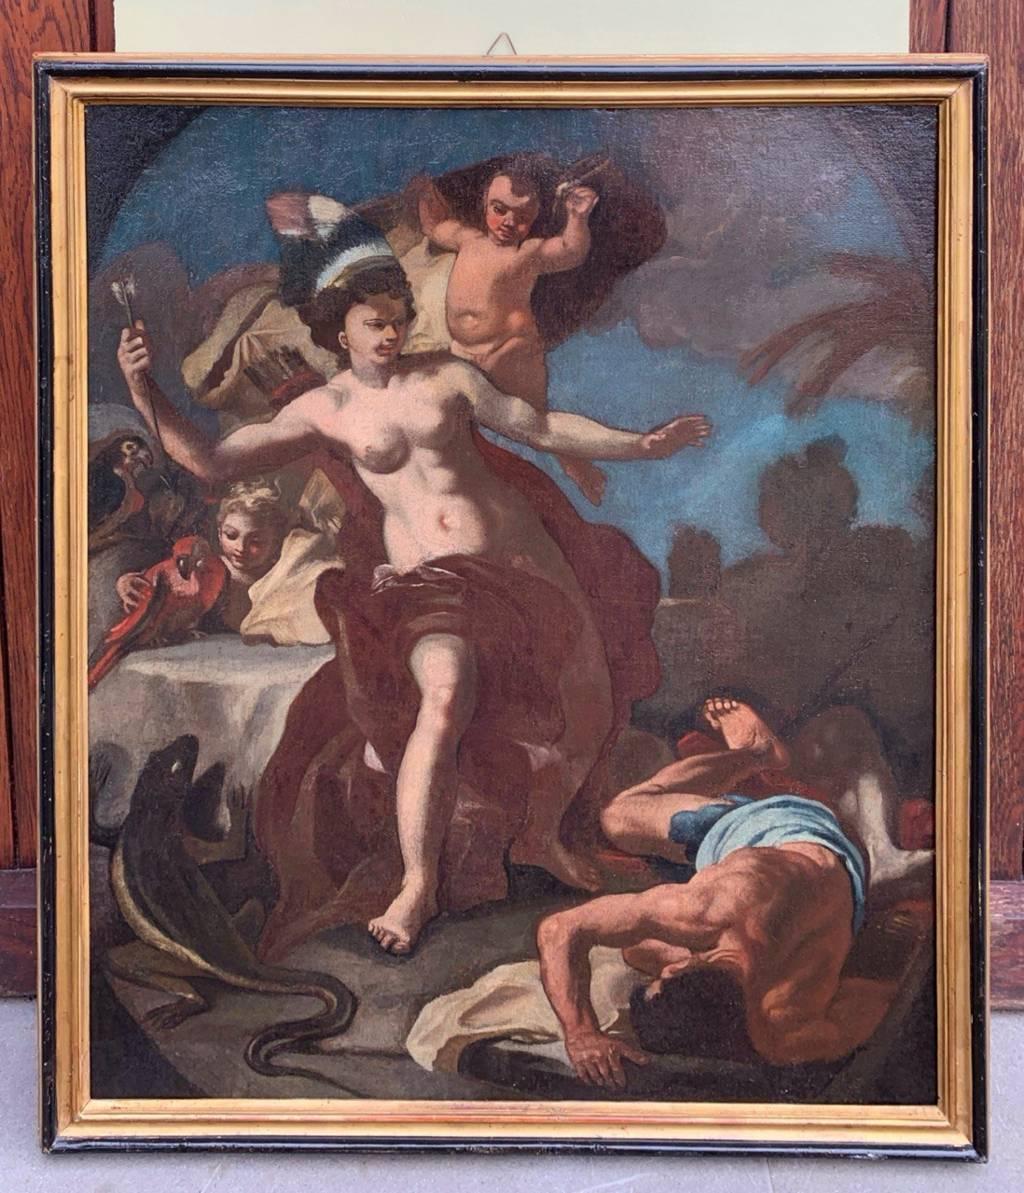 Rococò Neapolitan painter - 18th century figure painting - Allegory of America - Painting by Unknown